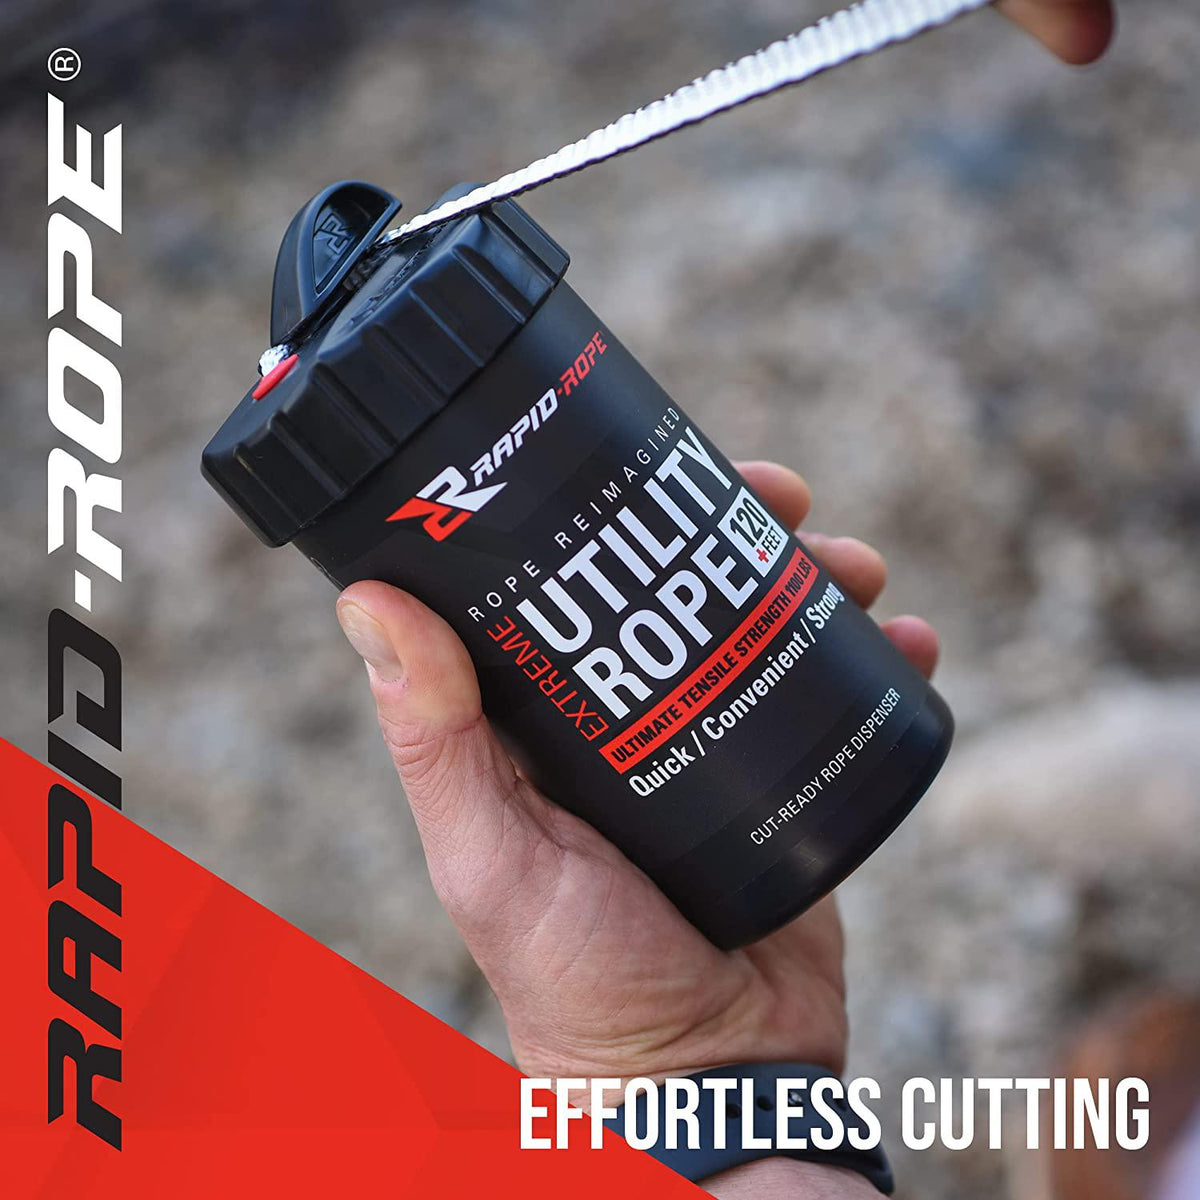 Rapid Rope Canisters | Rope In a Can | 120 Feet | 1100 lb Test | USA Made!